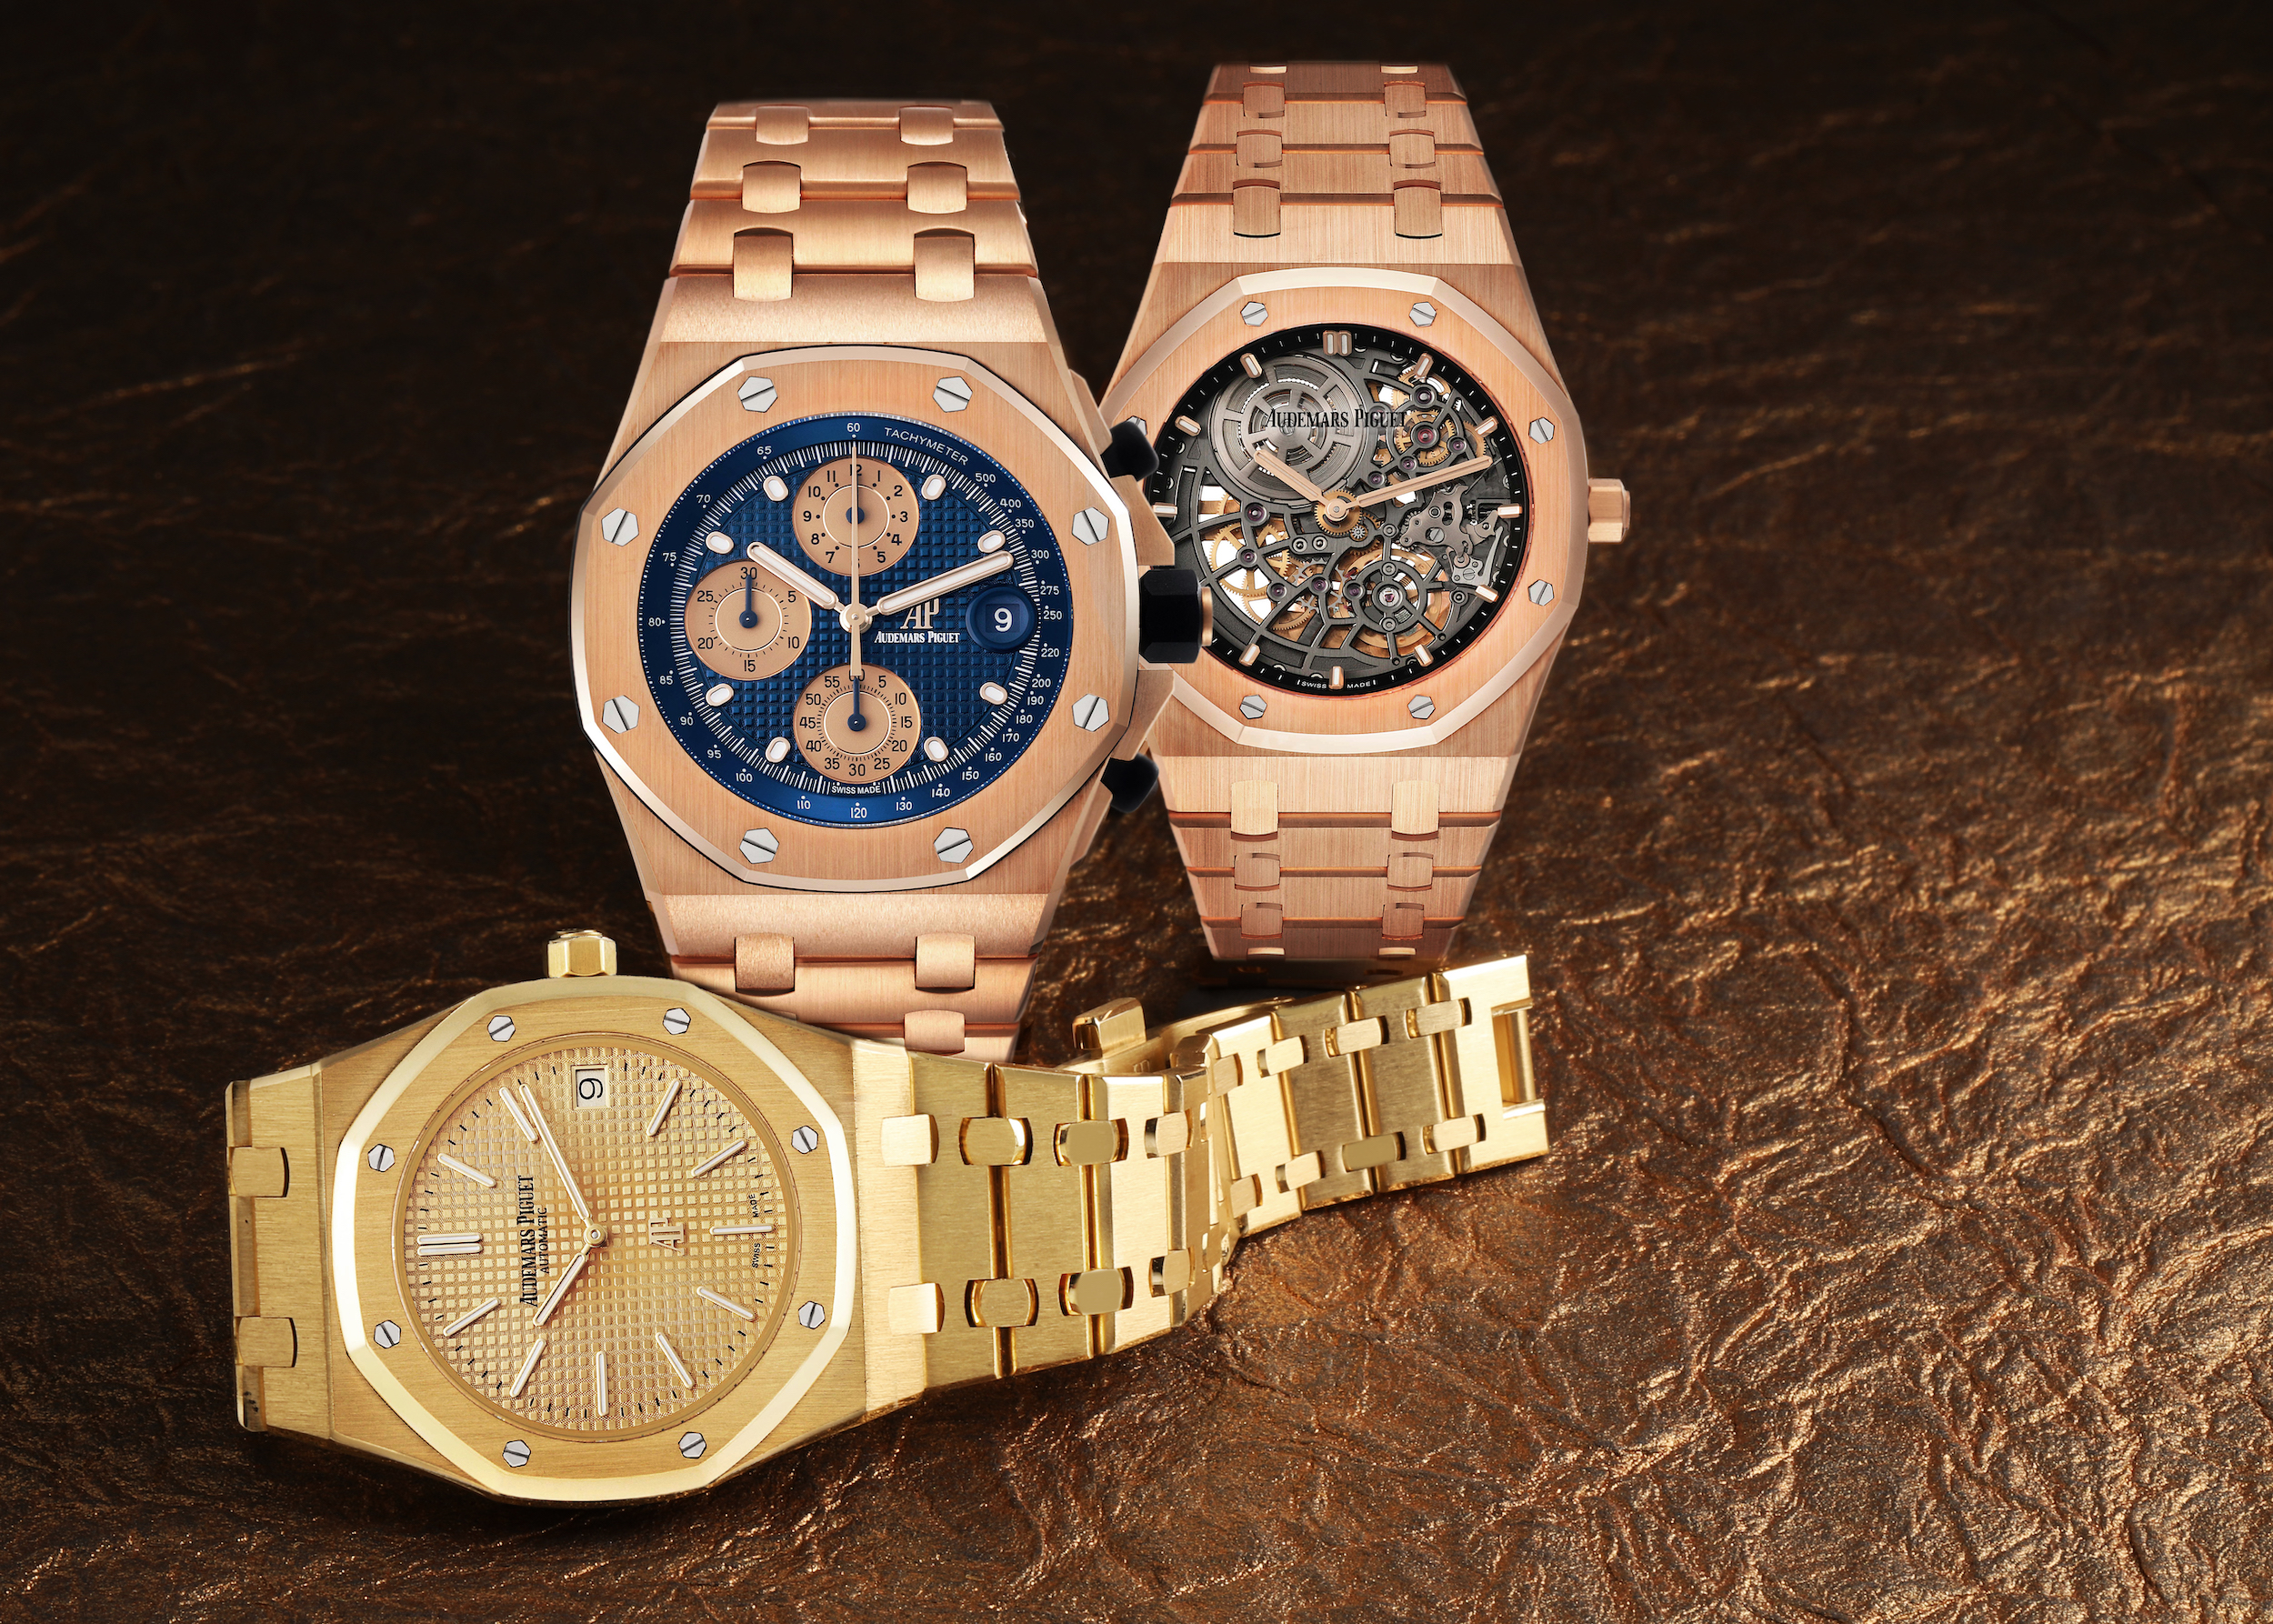 Audemars Piguet Just Released 8 New Royal Oak Watches for Women – Robb  Report